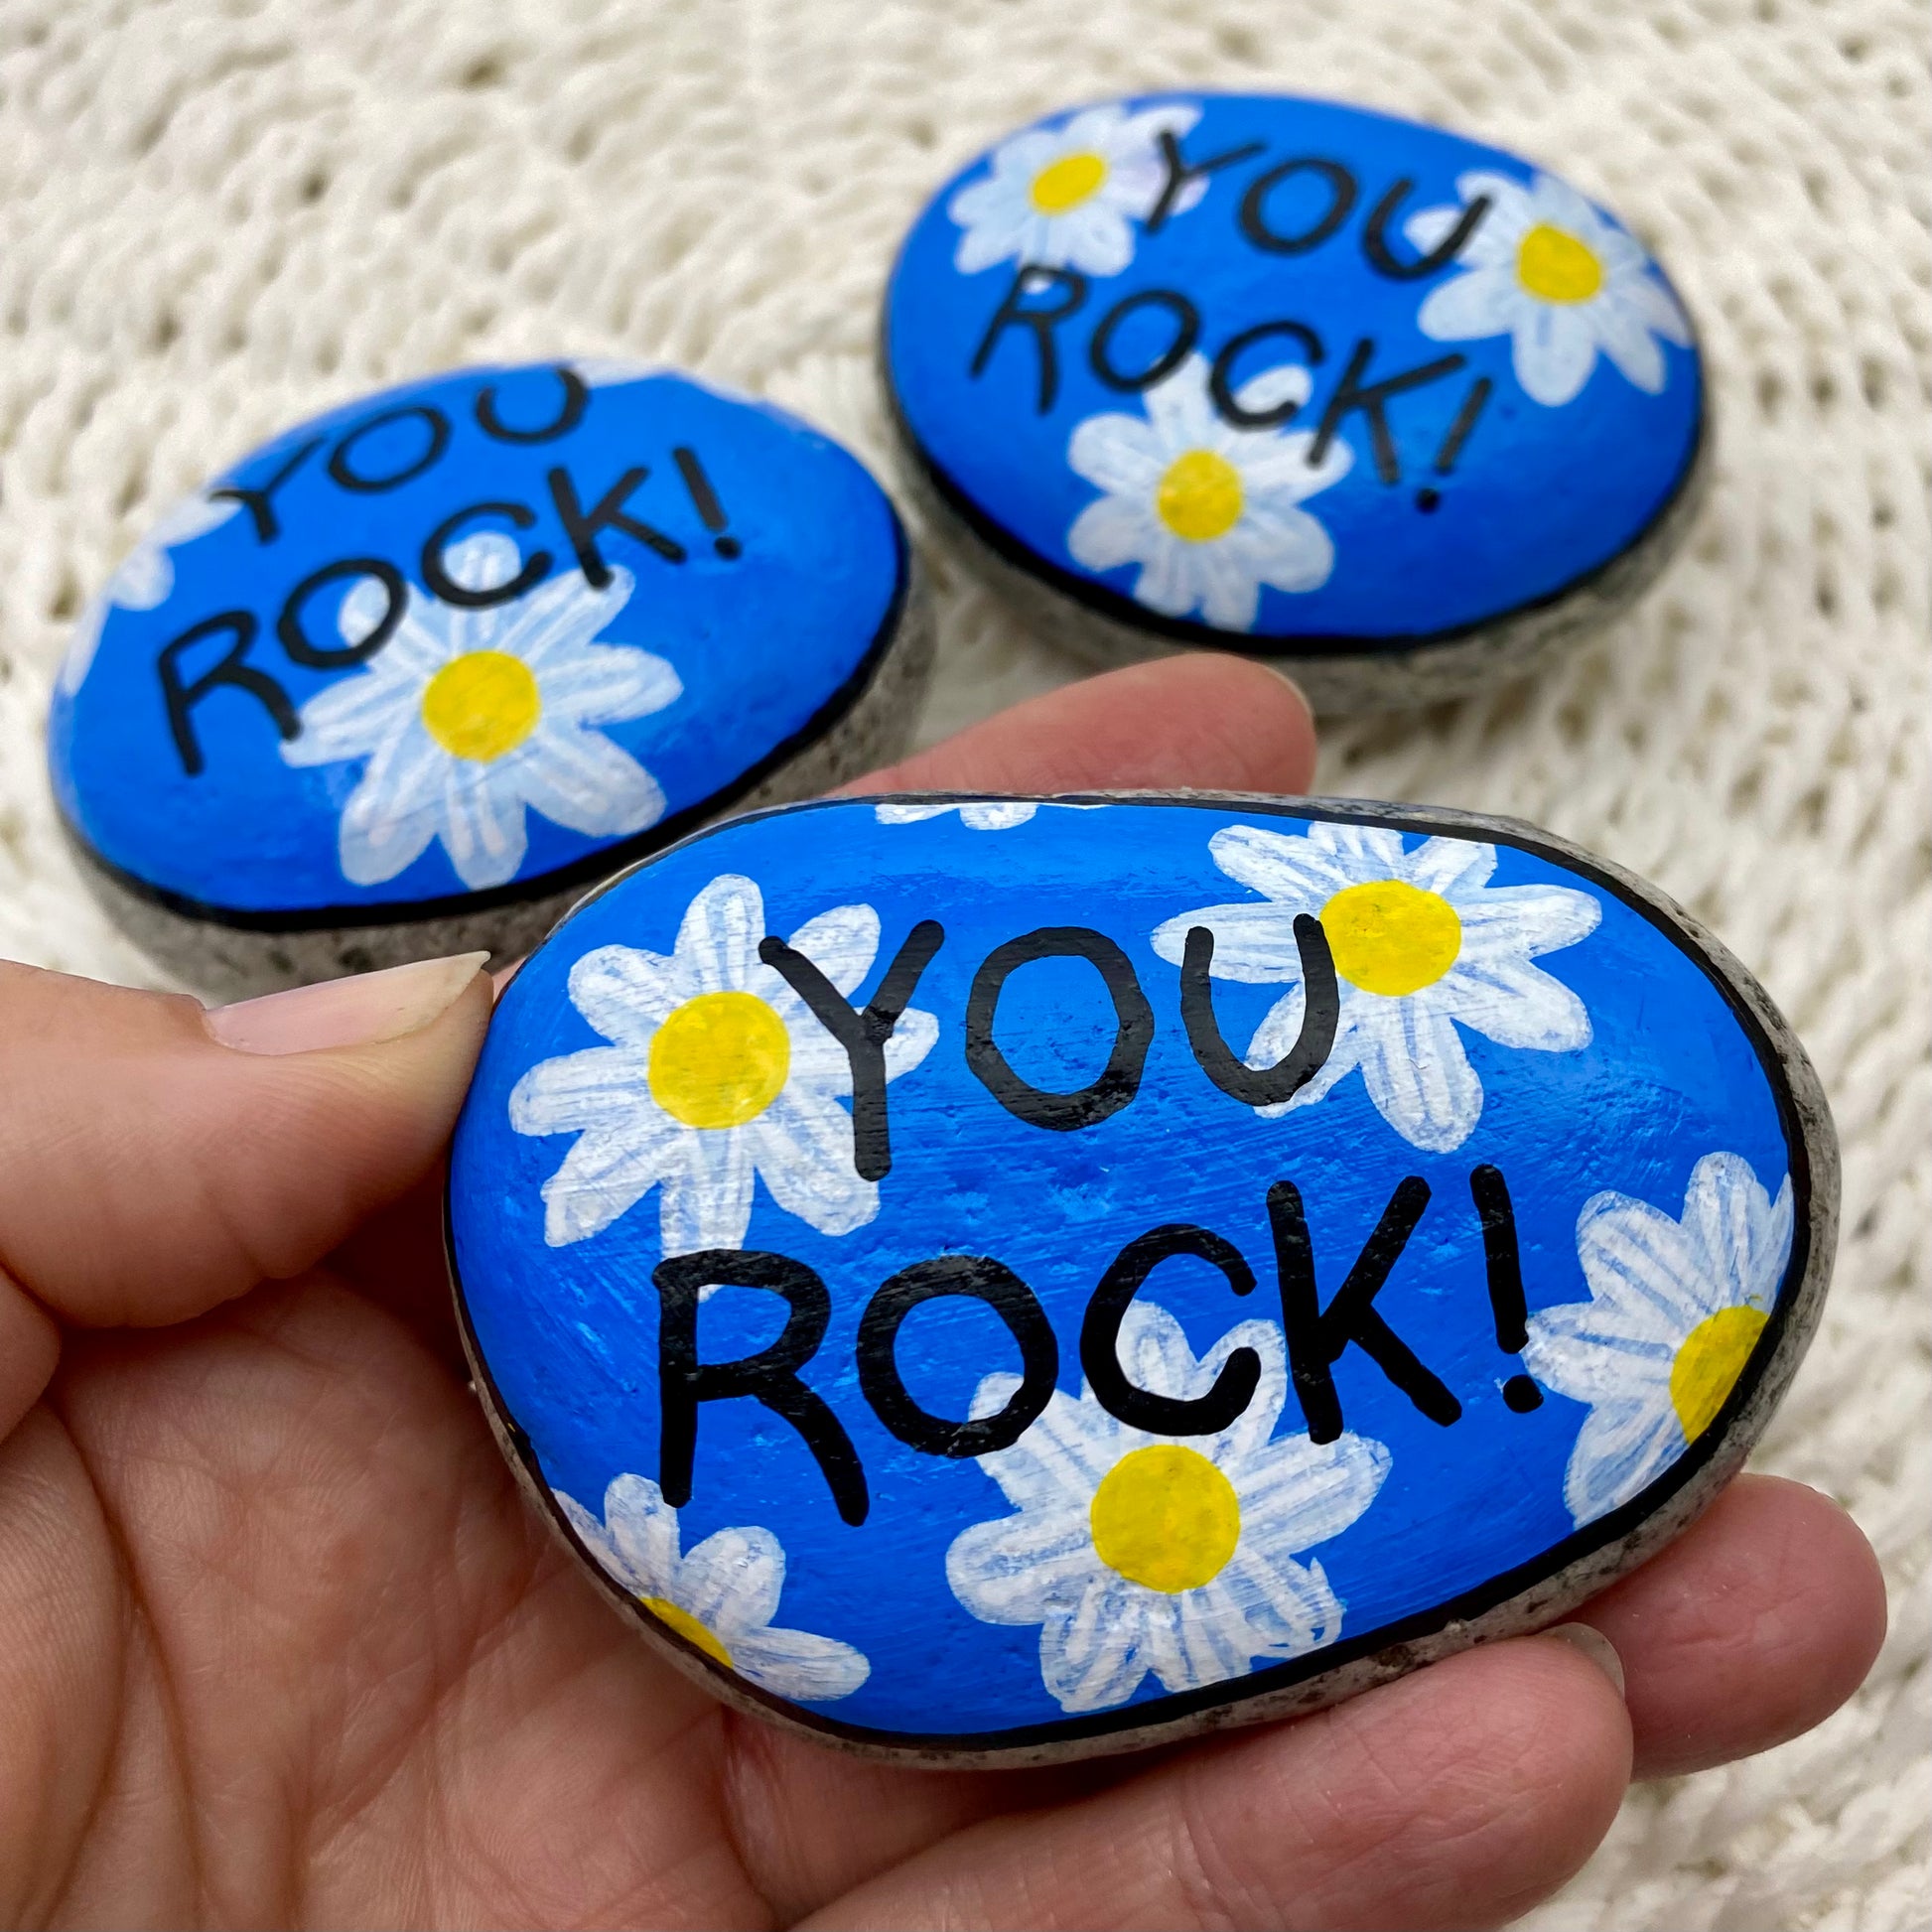 3 rocks painted blue with daisies and the words "You Rock!" painted over the top.